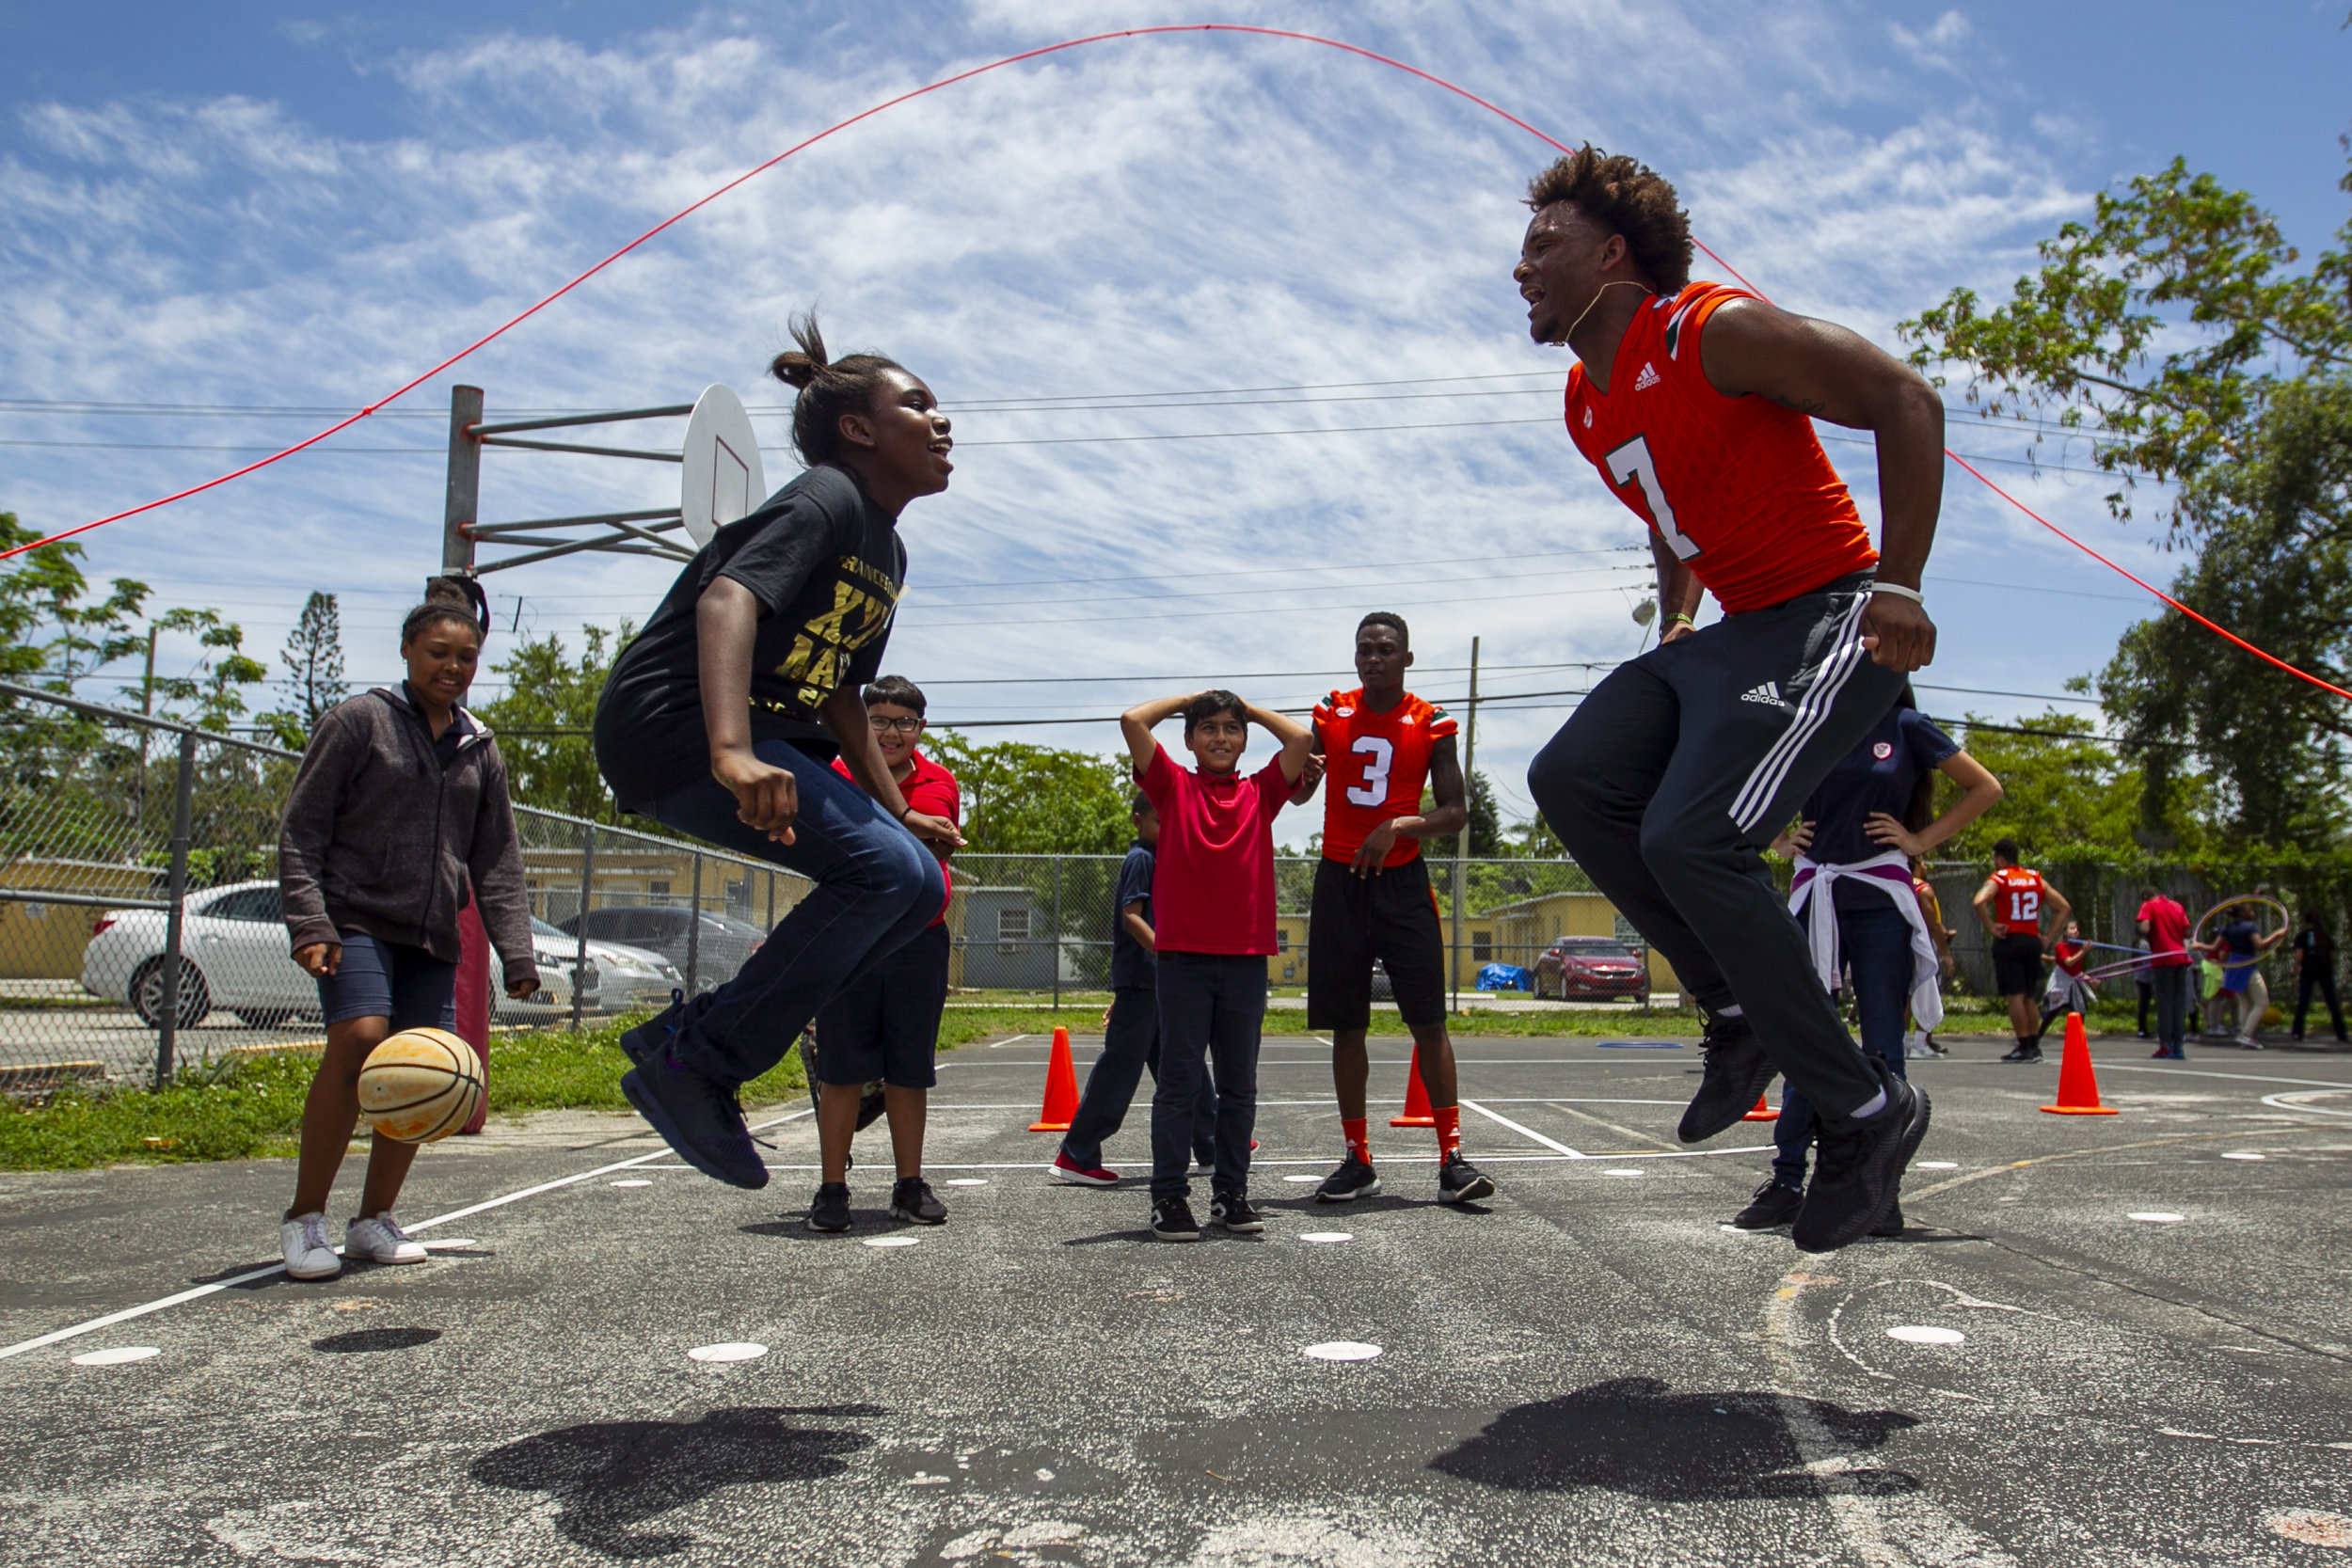  Karis Bellomy, left, jumps rope with University of Miami Hurricane player Brian Hightower (7) at Tucker Elementary School in Coconut Grove on Wednesday, May 23, 2018. The players participated in a day of community service at Tucker Elementary where 